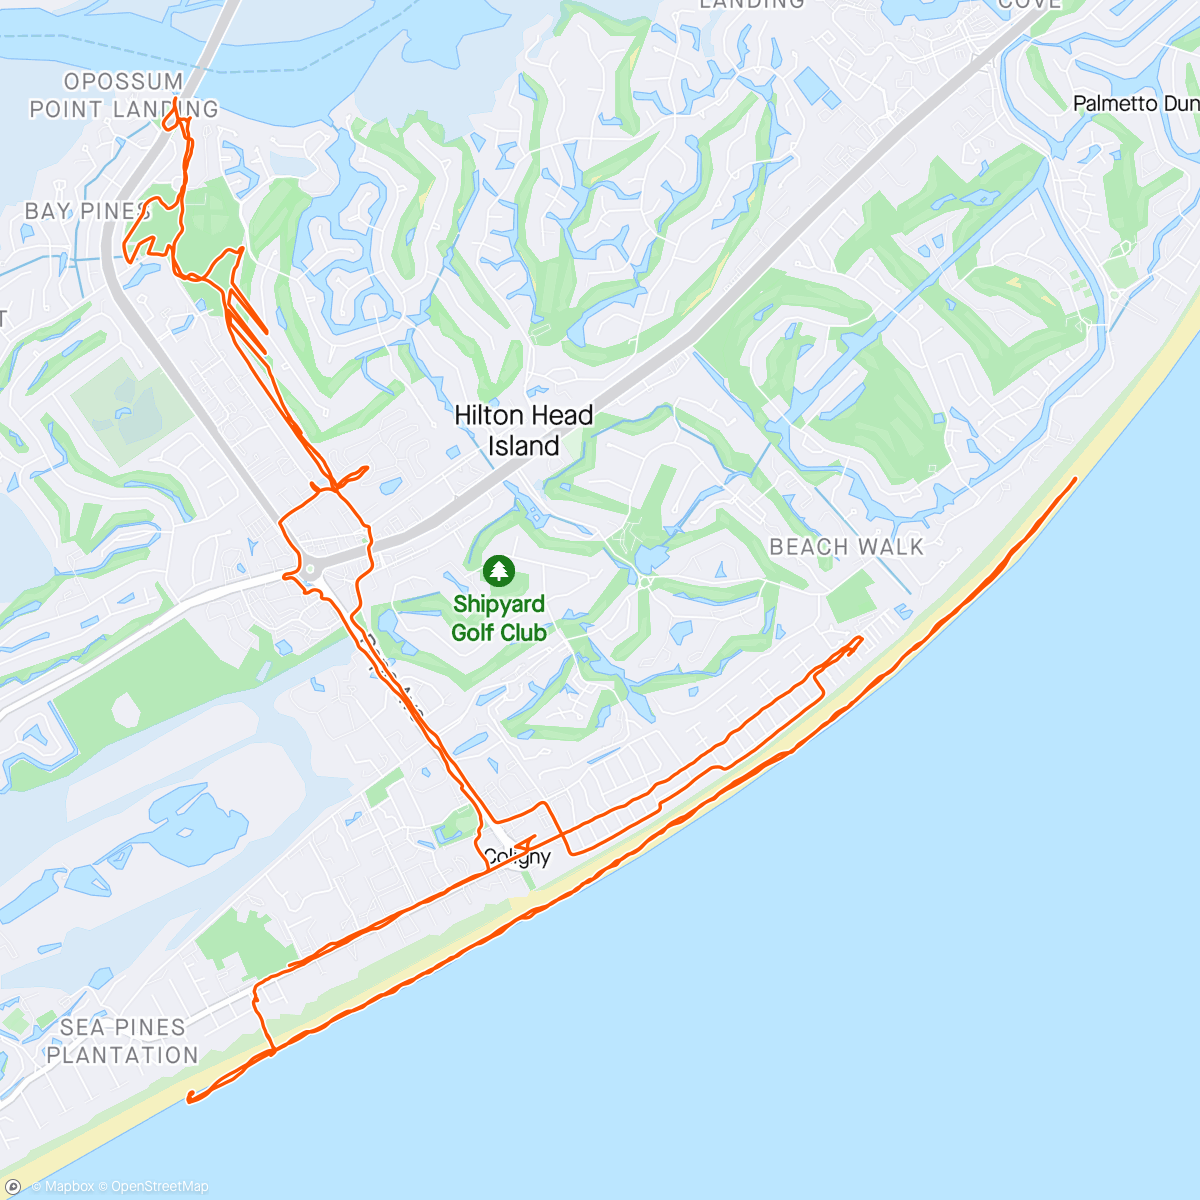 Map of the activity, First on the Trek Fuel, a great mountain bike I use on easy trails here, then on the Specialized Roll, a great beach and trail bike for the whole island.